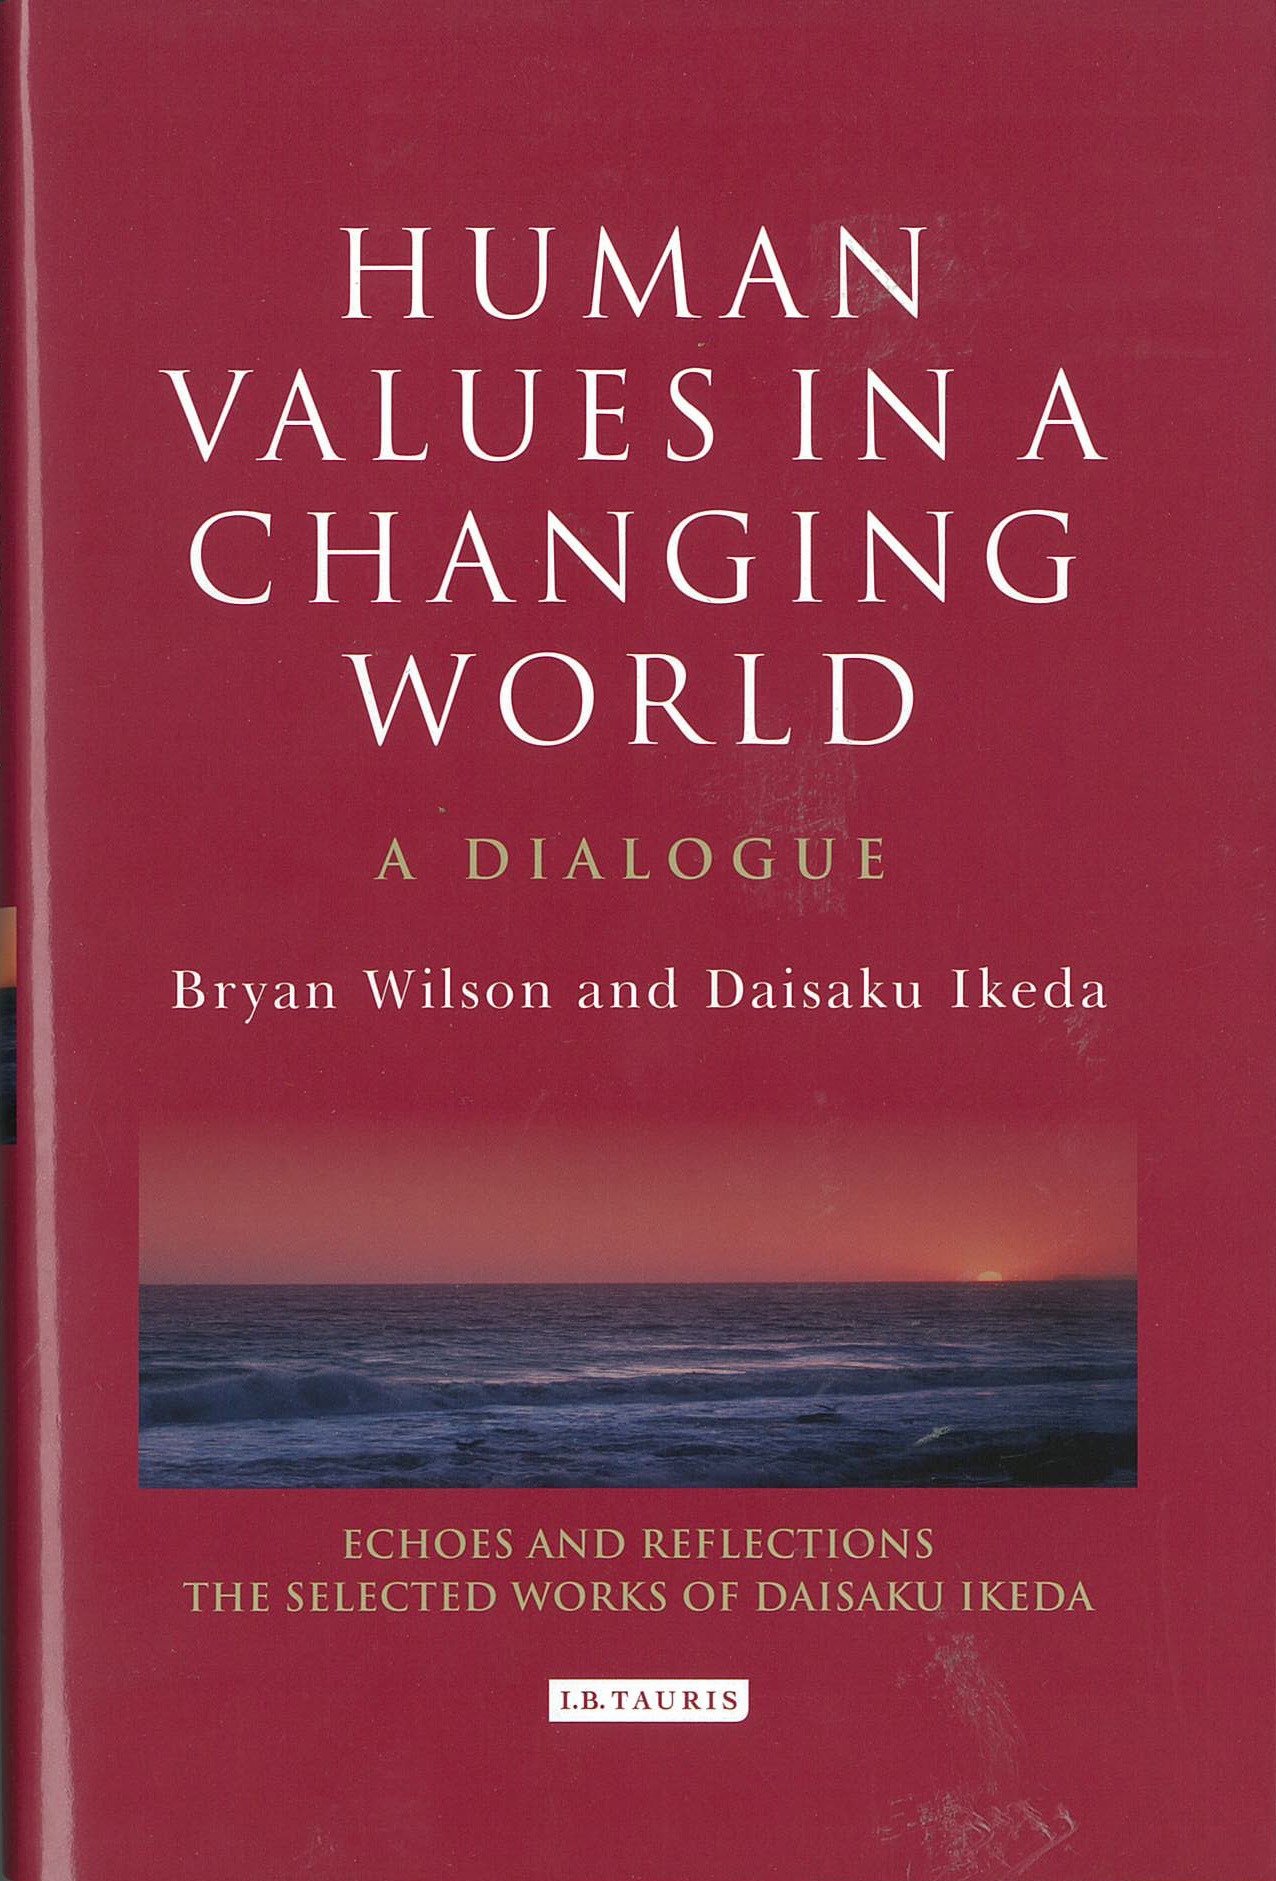 Human Values in Changing World